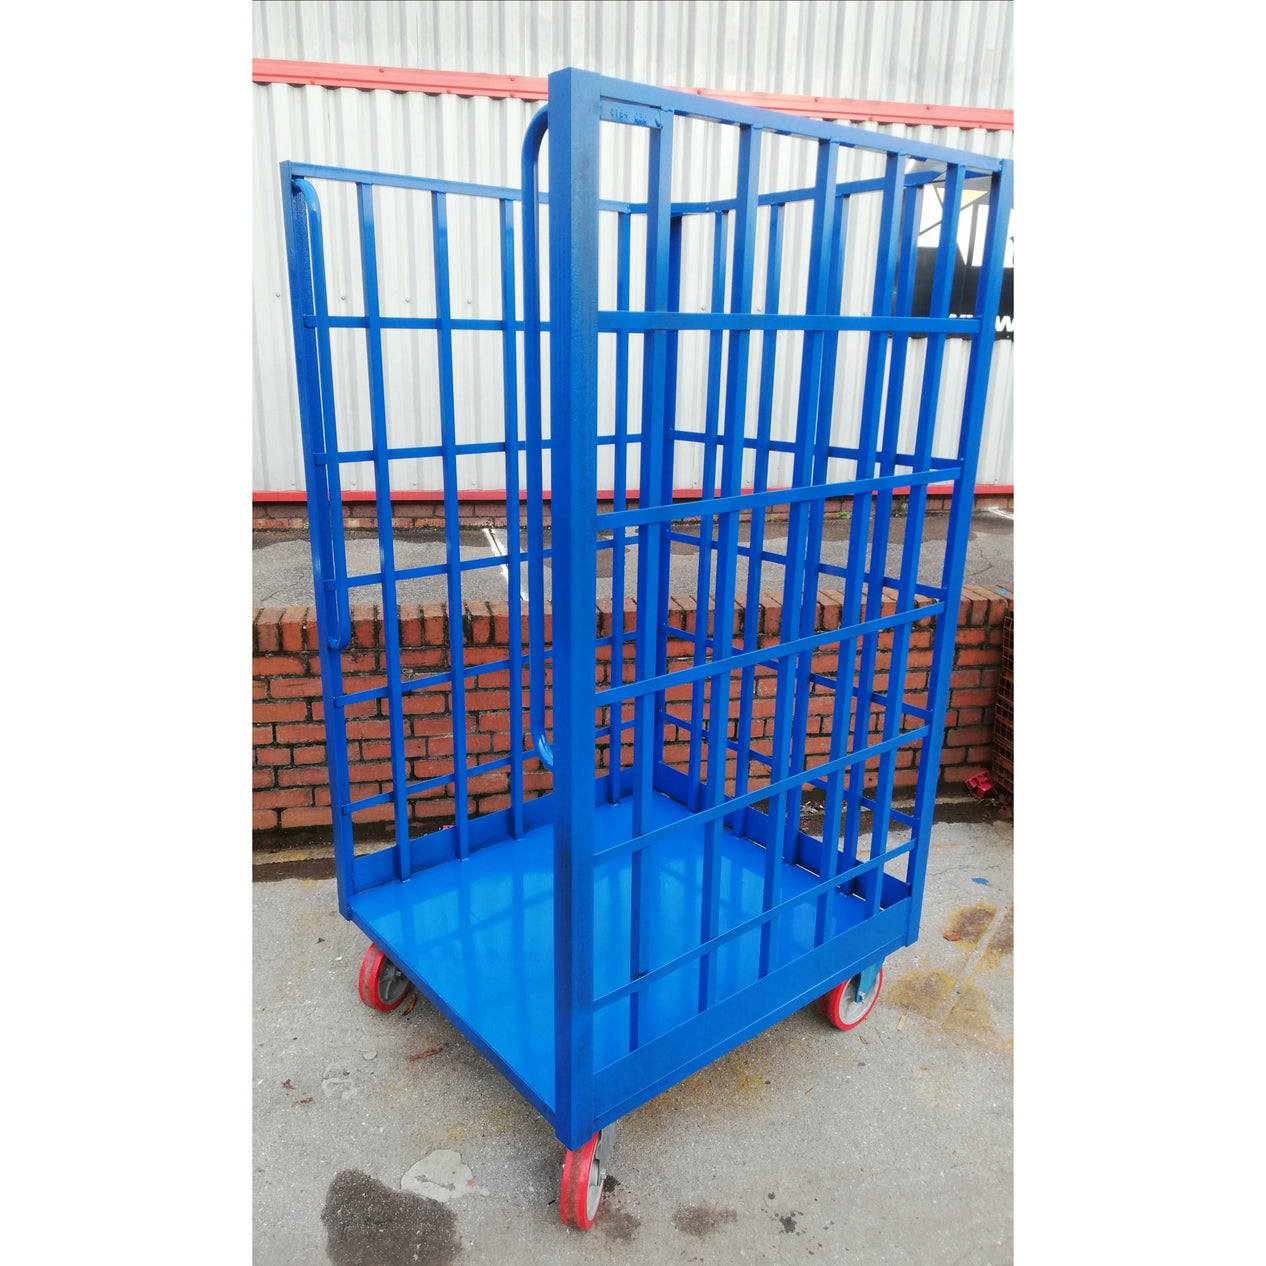 Three Sided Transport Parcel Cage | Blue Trolley